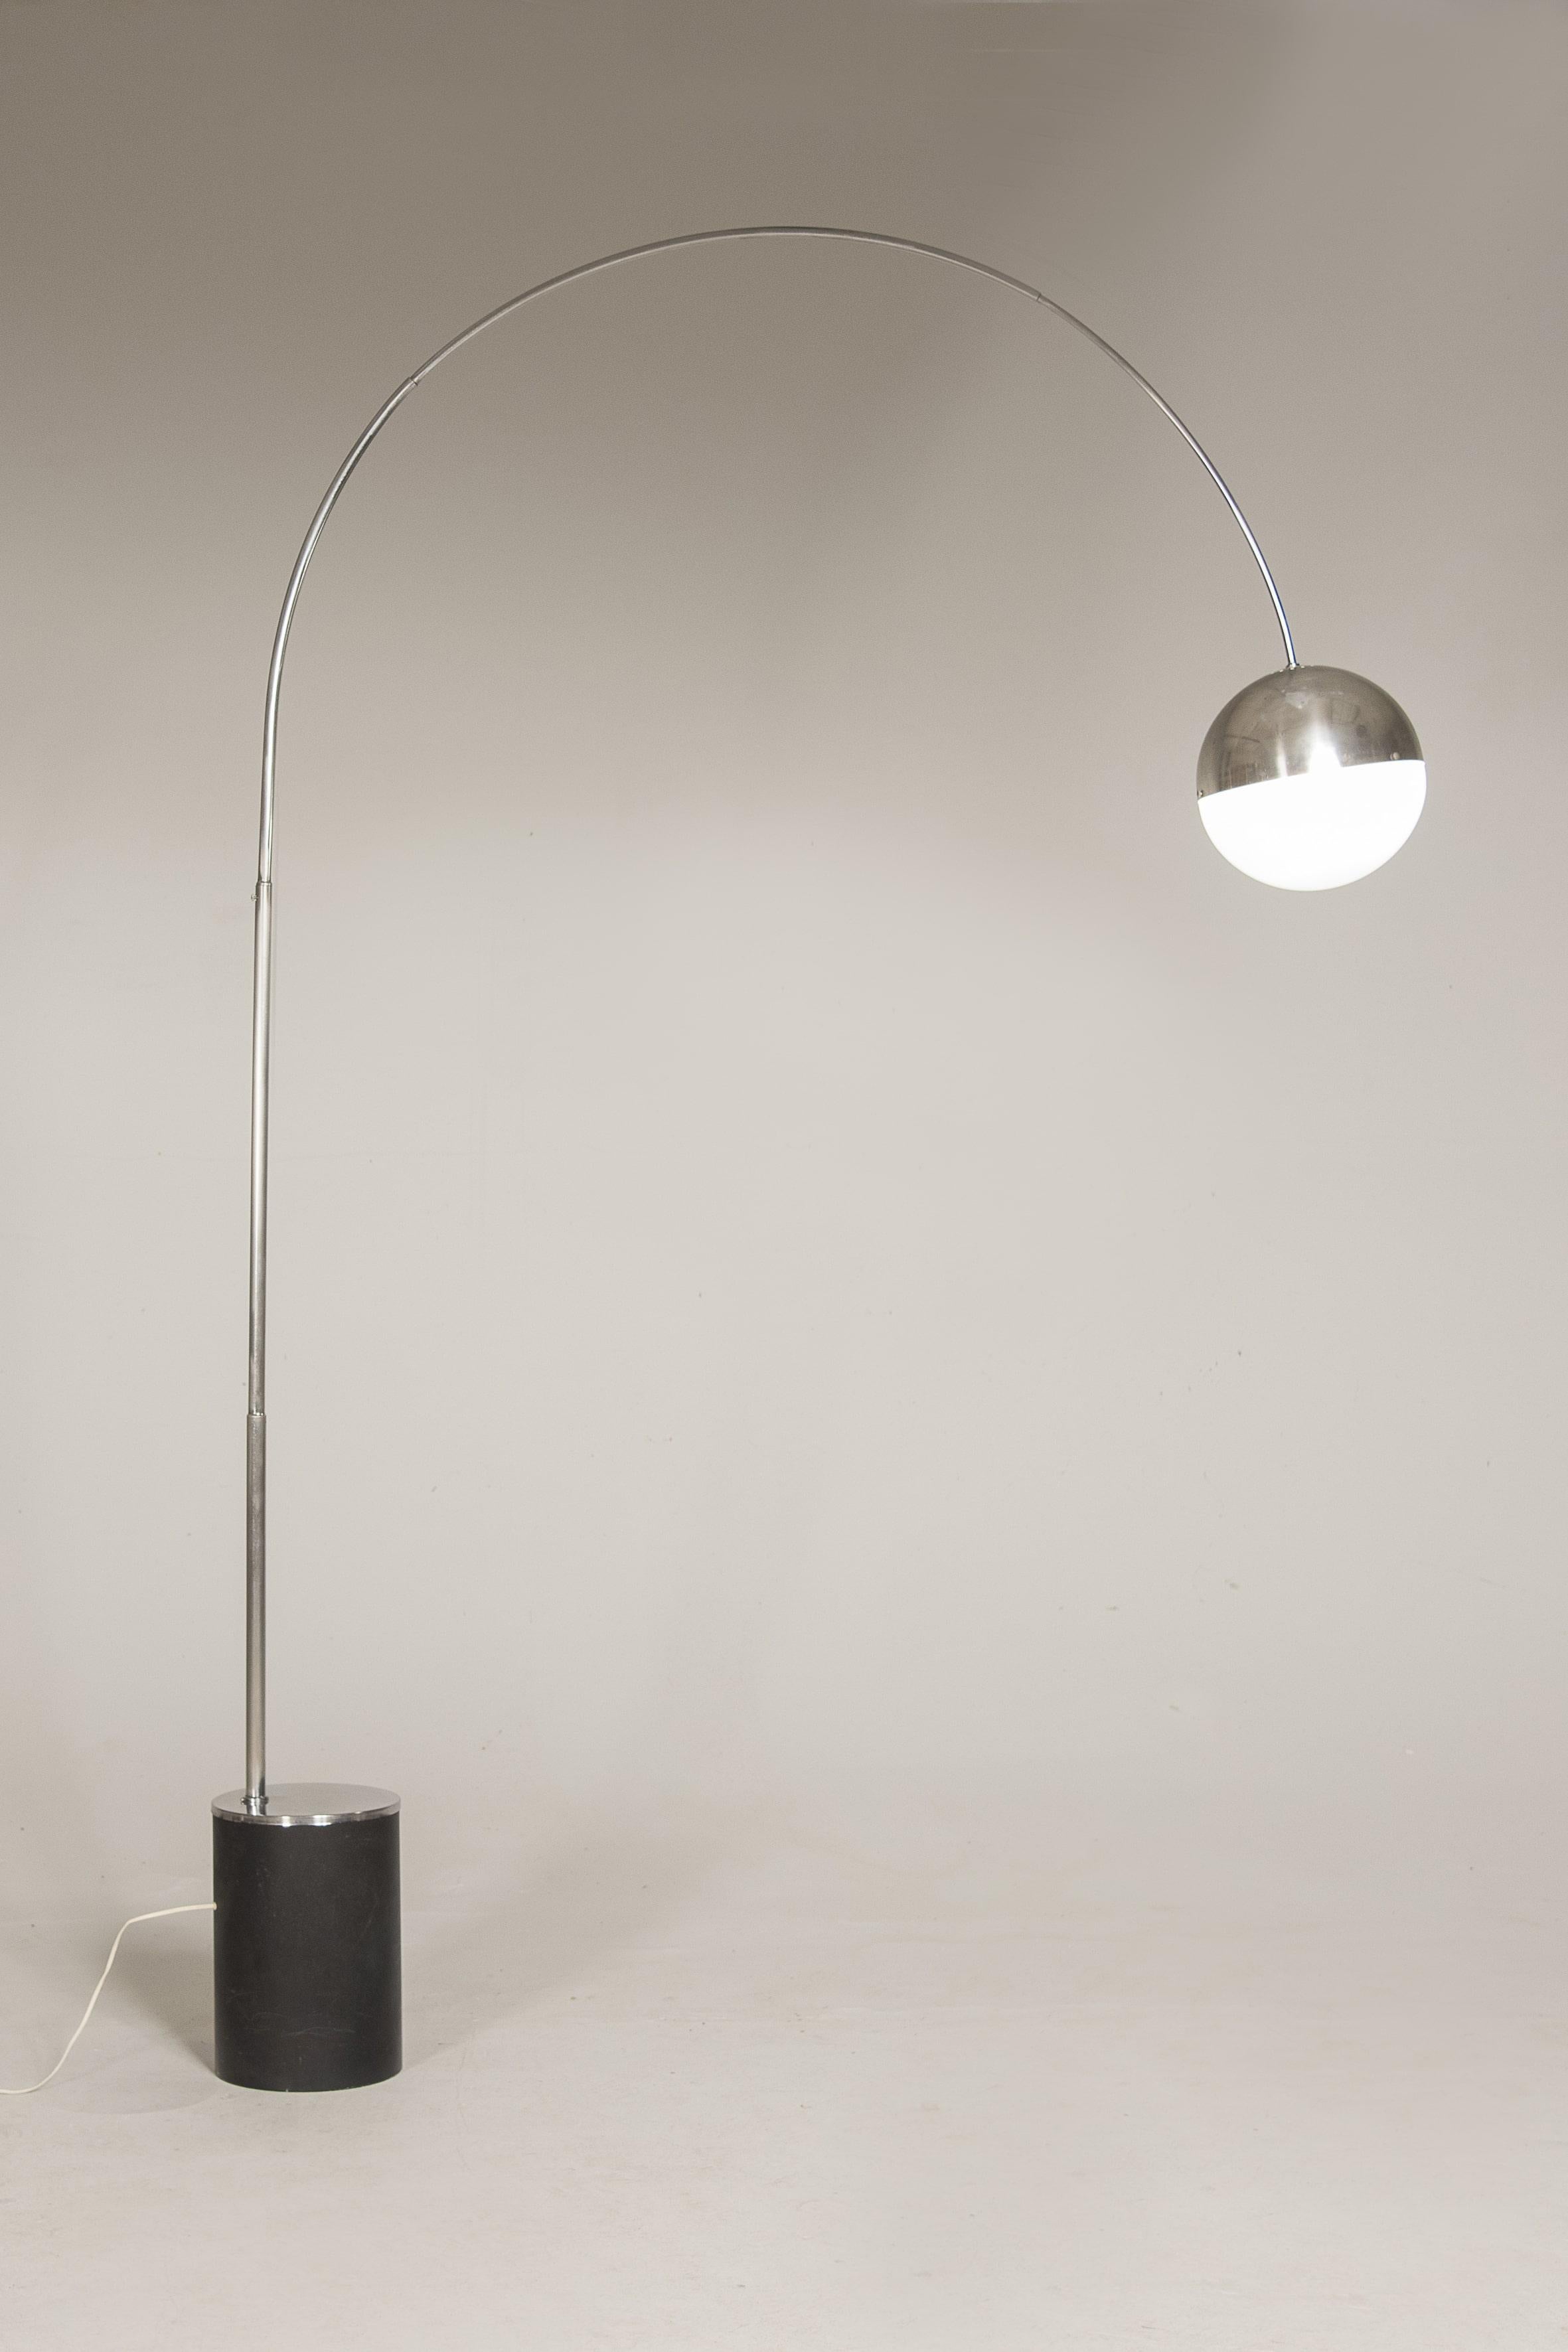 1970s arch Reggiani floor lamp.
Cilindric base made with black metal and steel.
Telescopic steel arm
Sferica lamp shade made in steel and plastic.
Measures: Height total is 250 cm 
weight total is 170 cm
base is h 24 c, 22 x 28 cm
Wiring